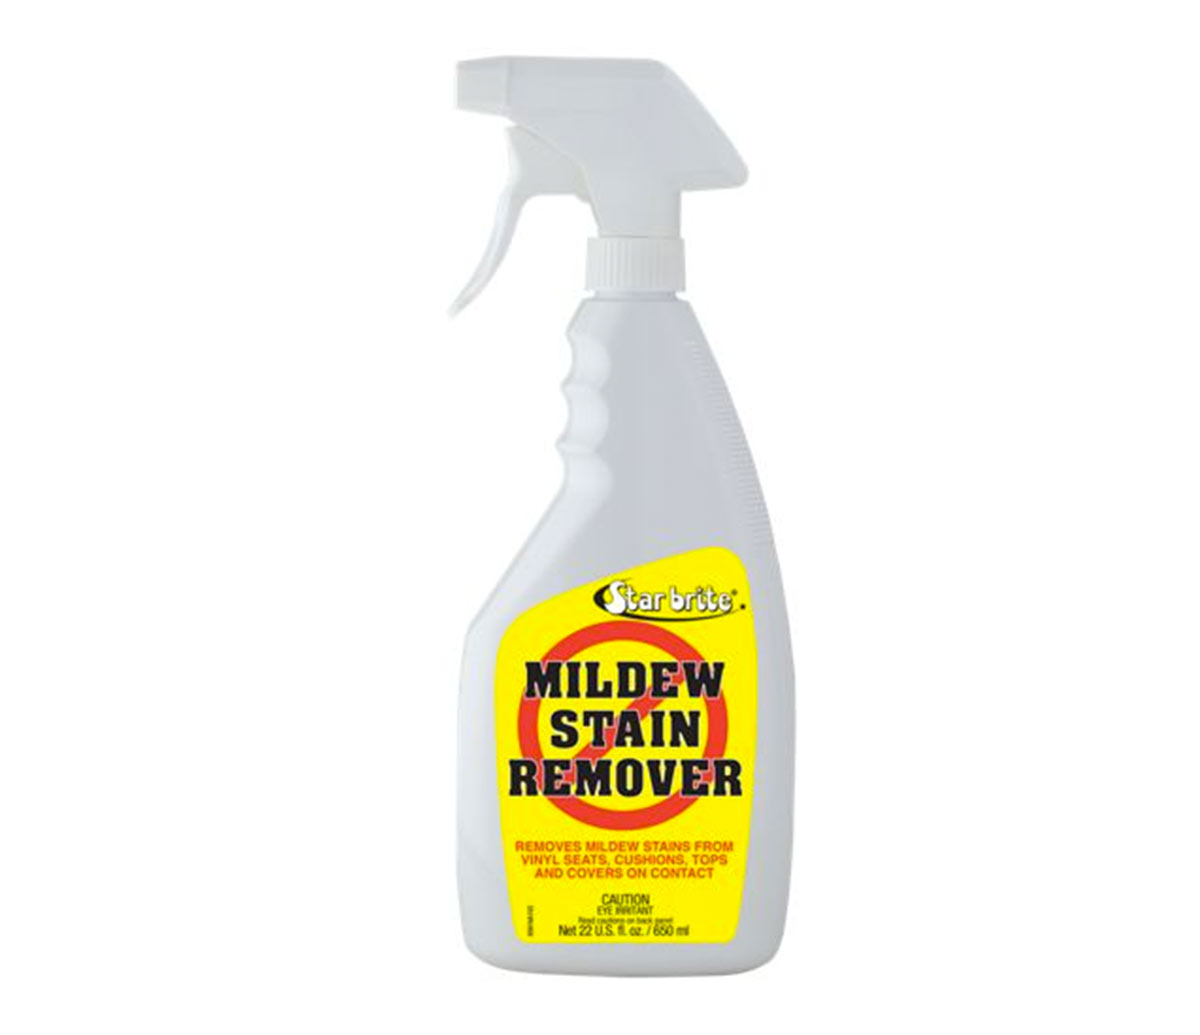 Mold remover